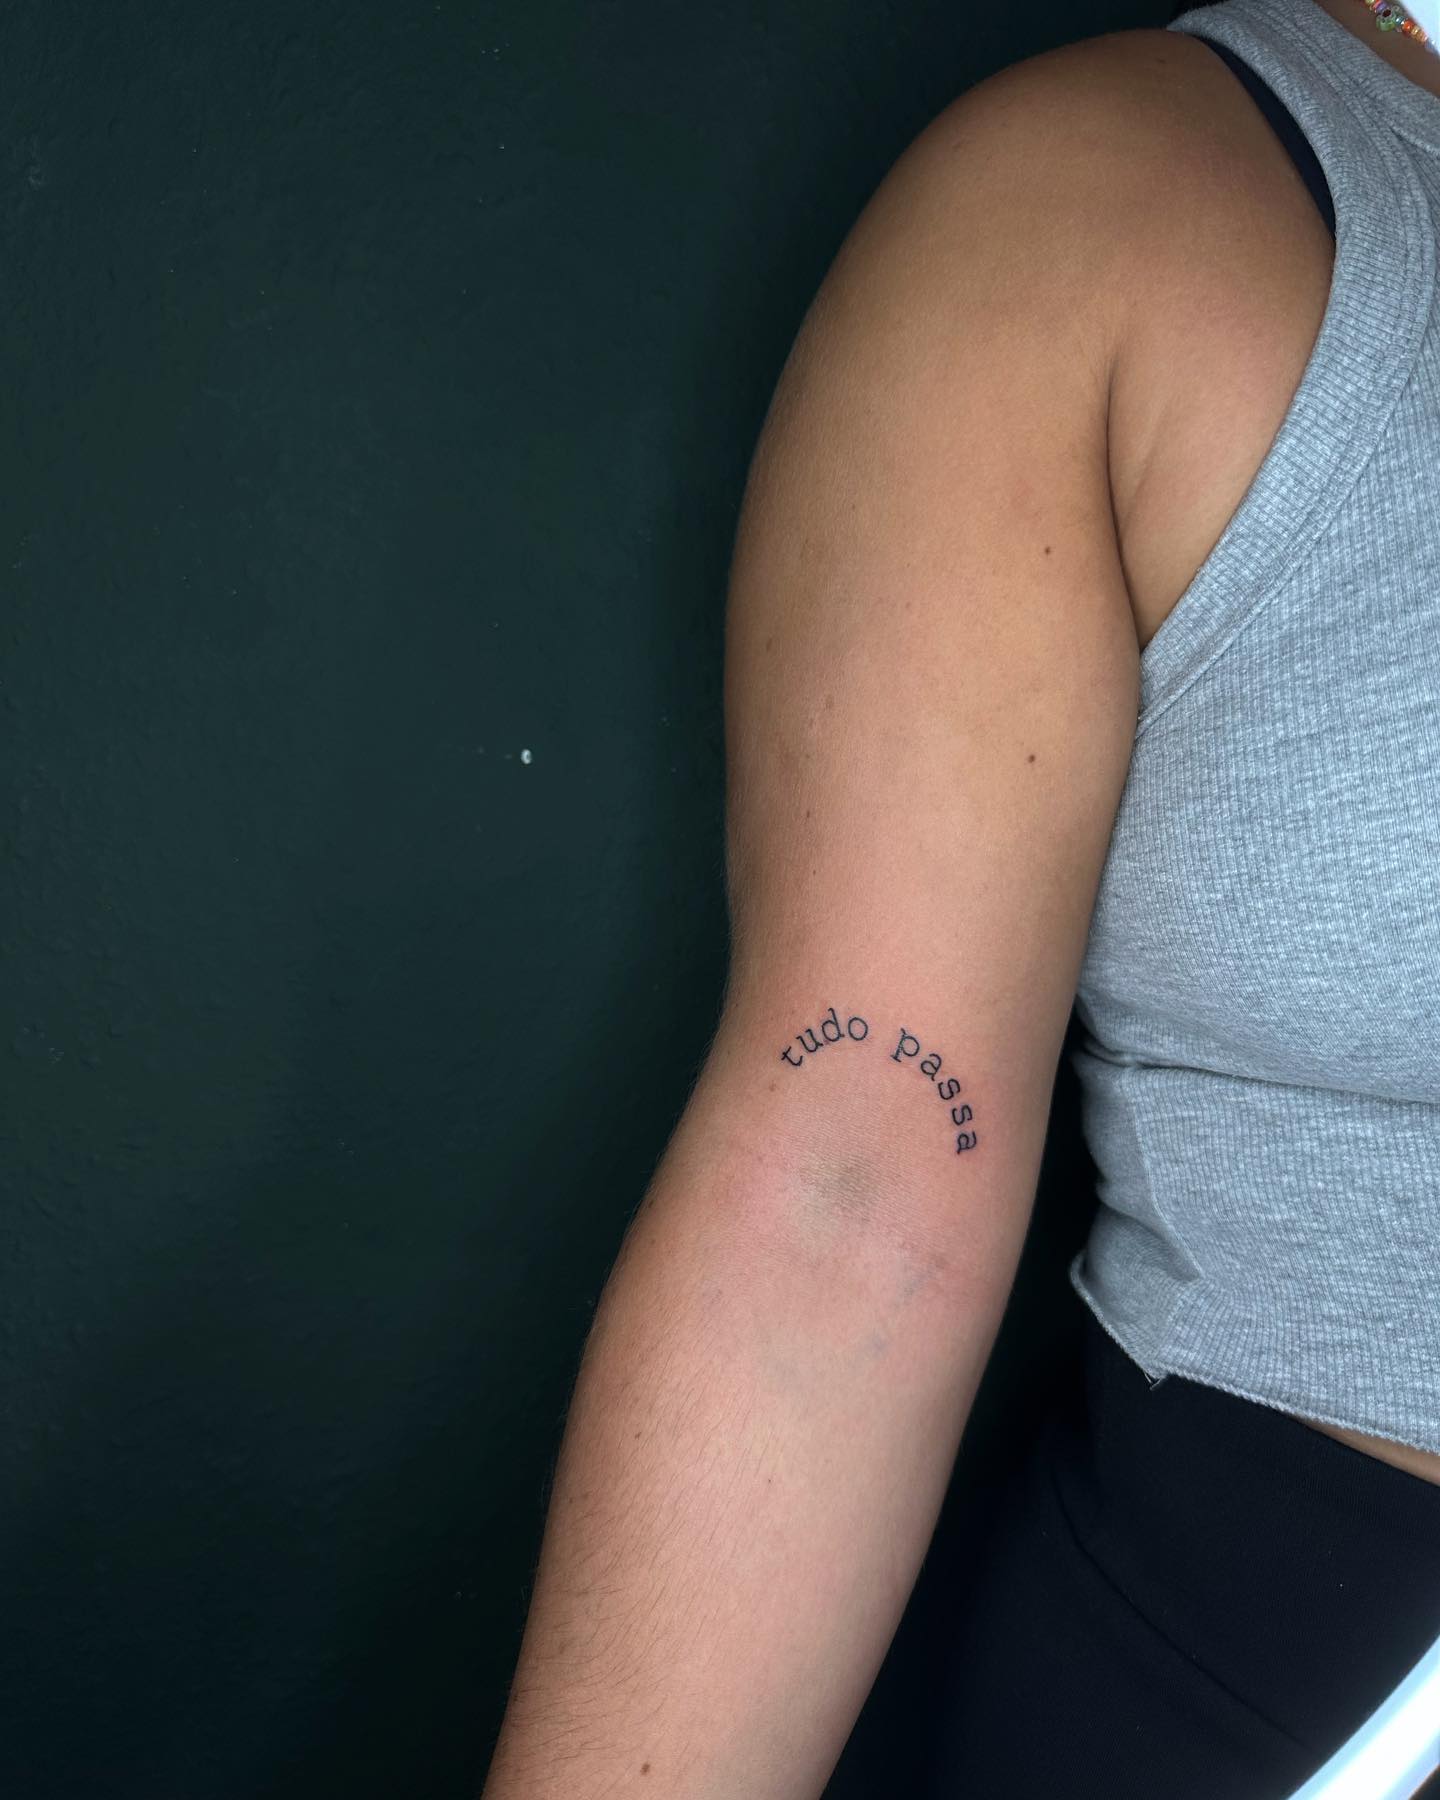 __ everything will pass

Thank you so much @meu.thelabel 

#tattoo #tattooideas